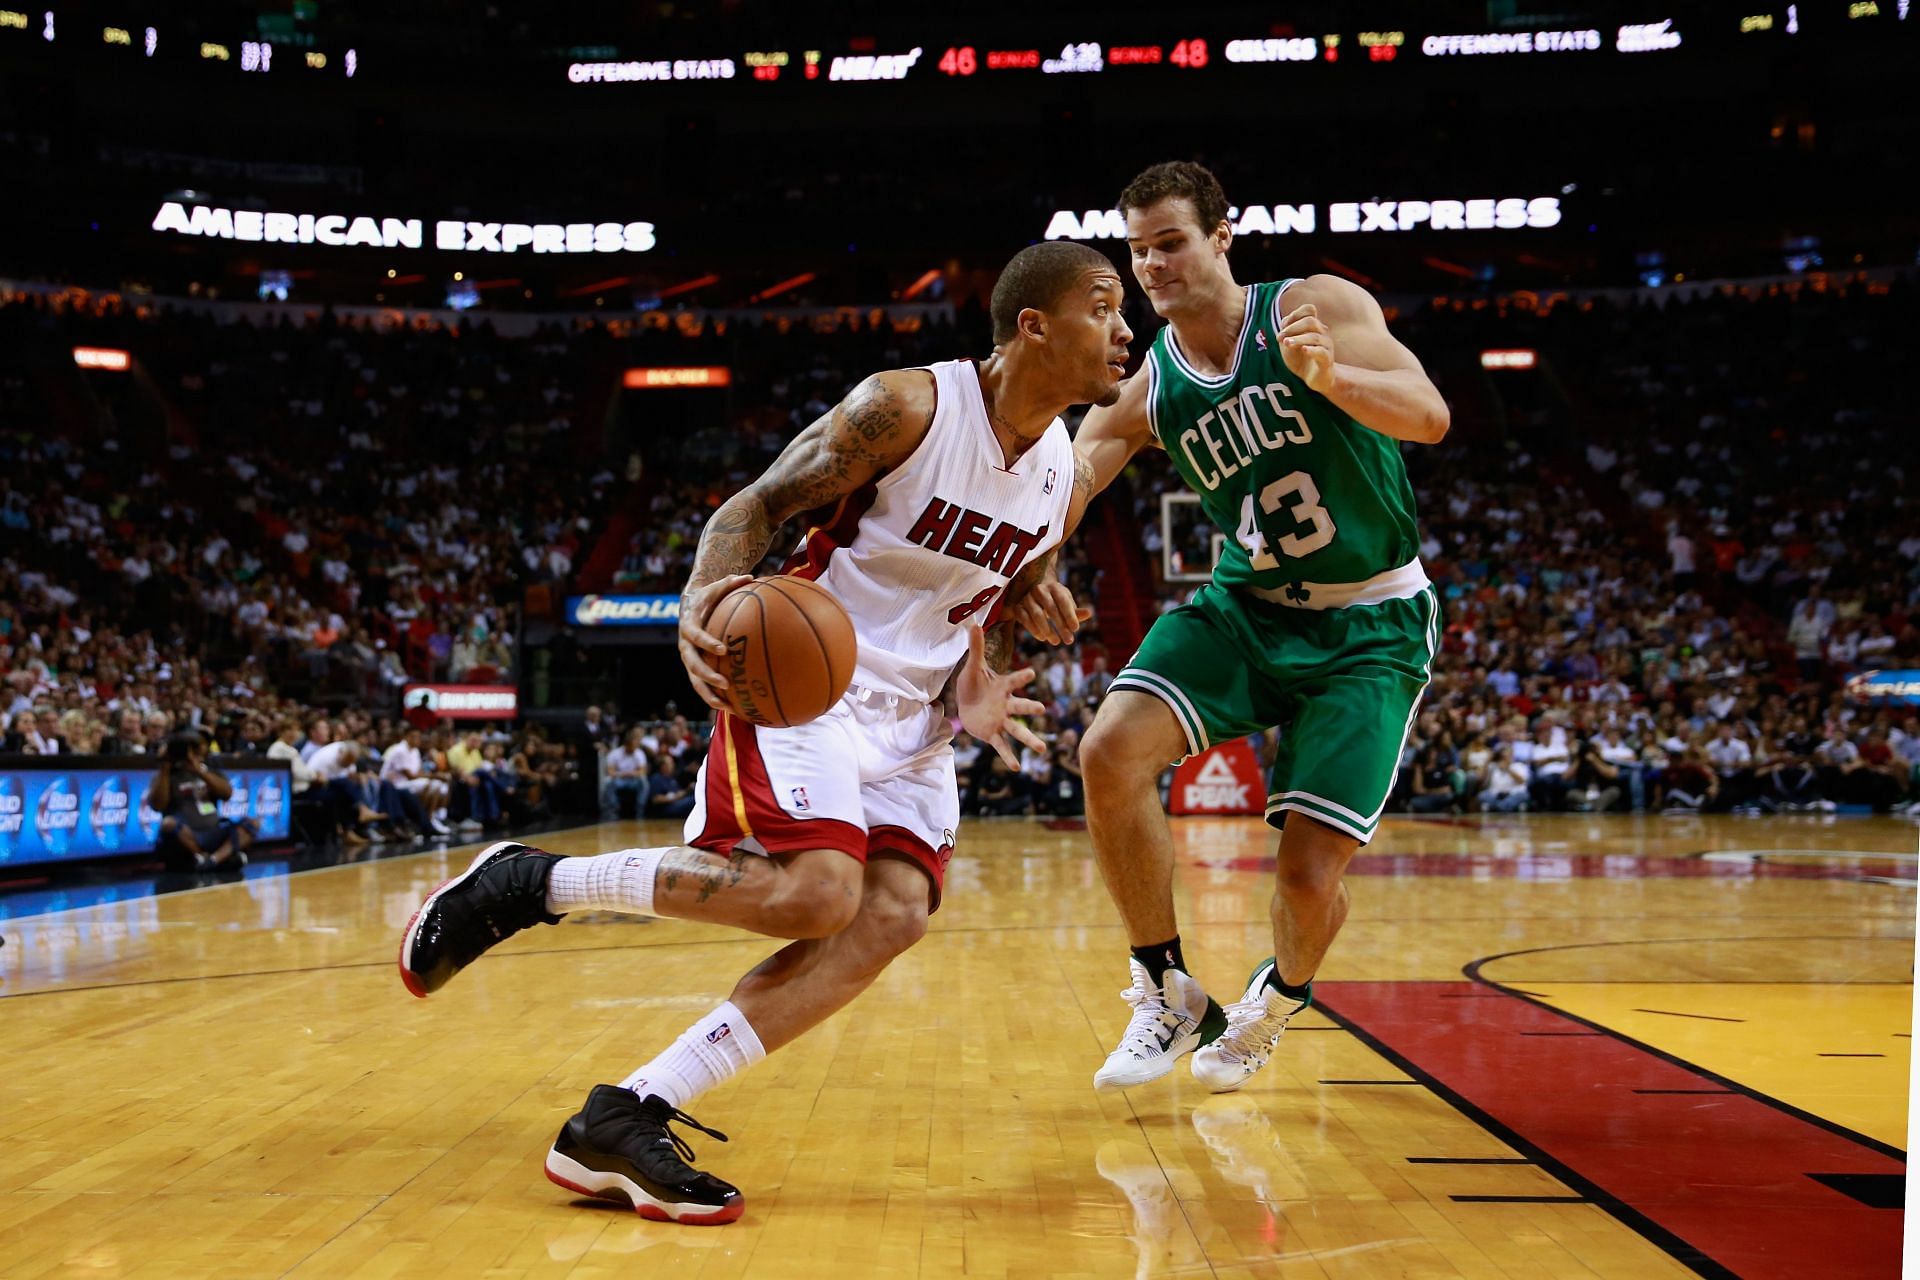 Kris Humphries was sent to the Boston Celtics in a blockbuster trade (Image via Getty Images)